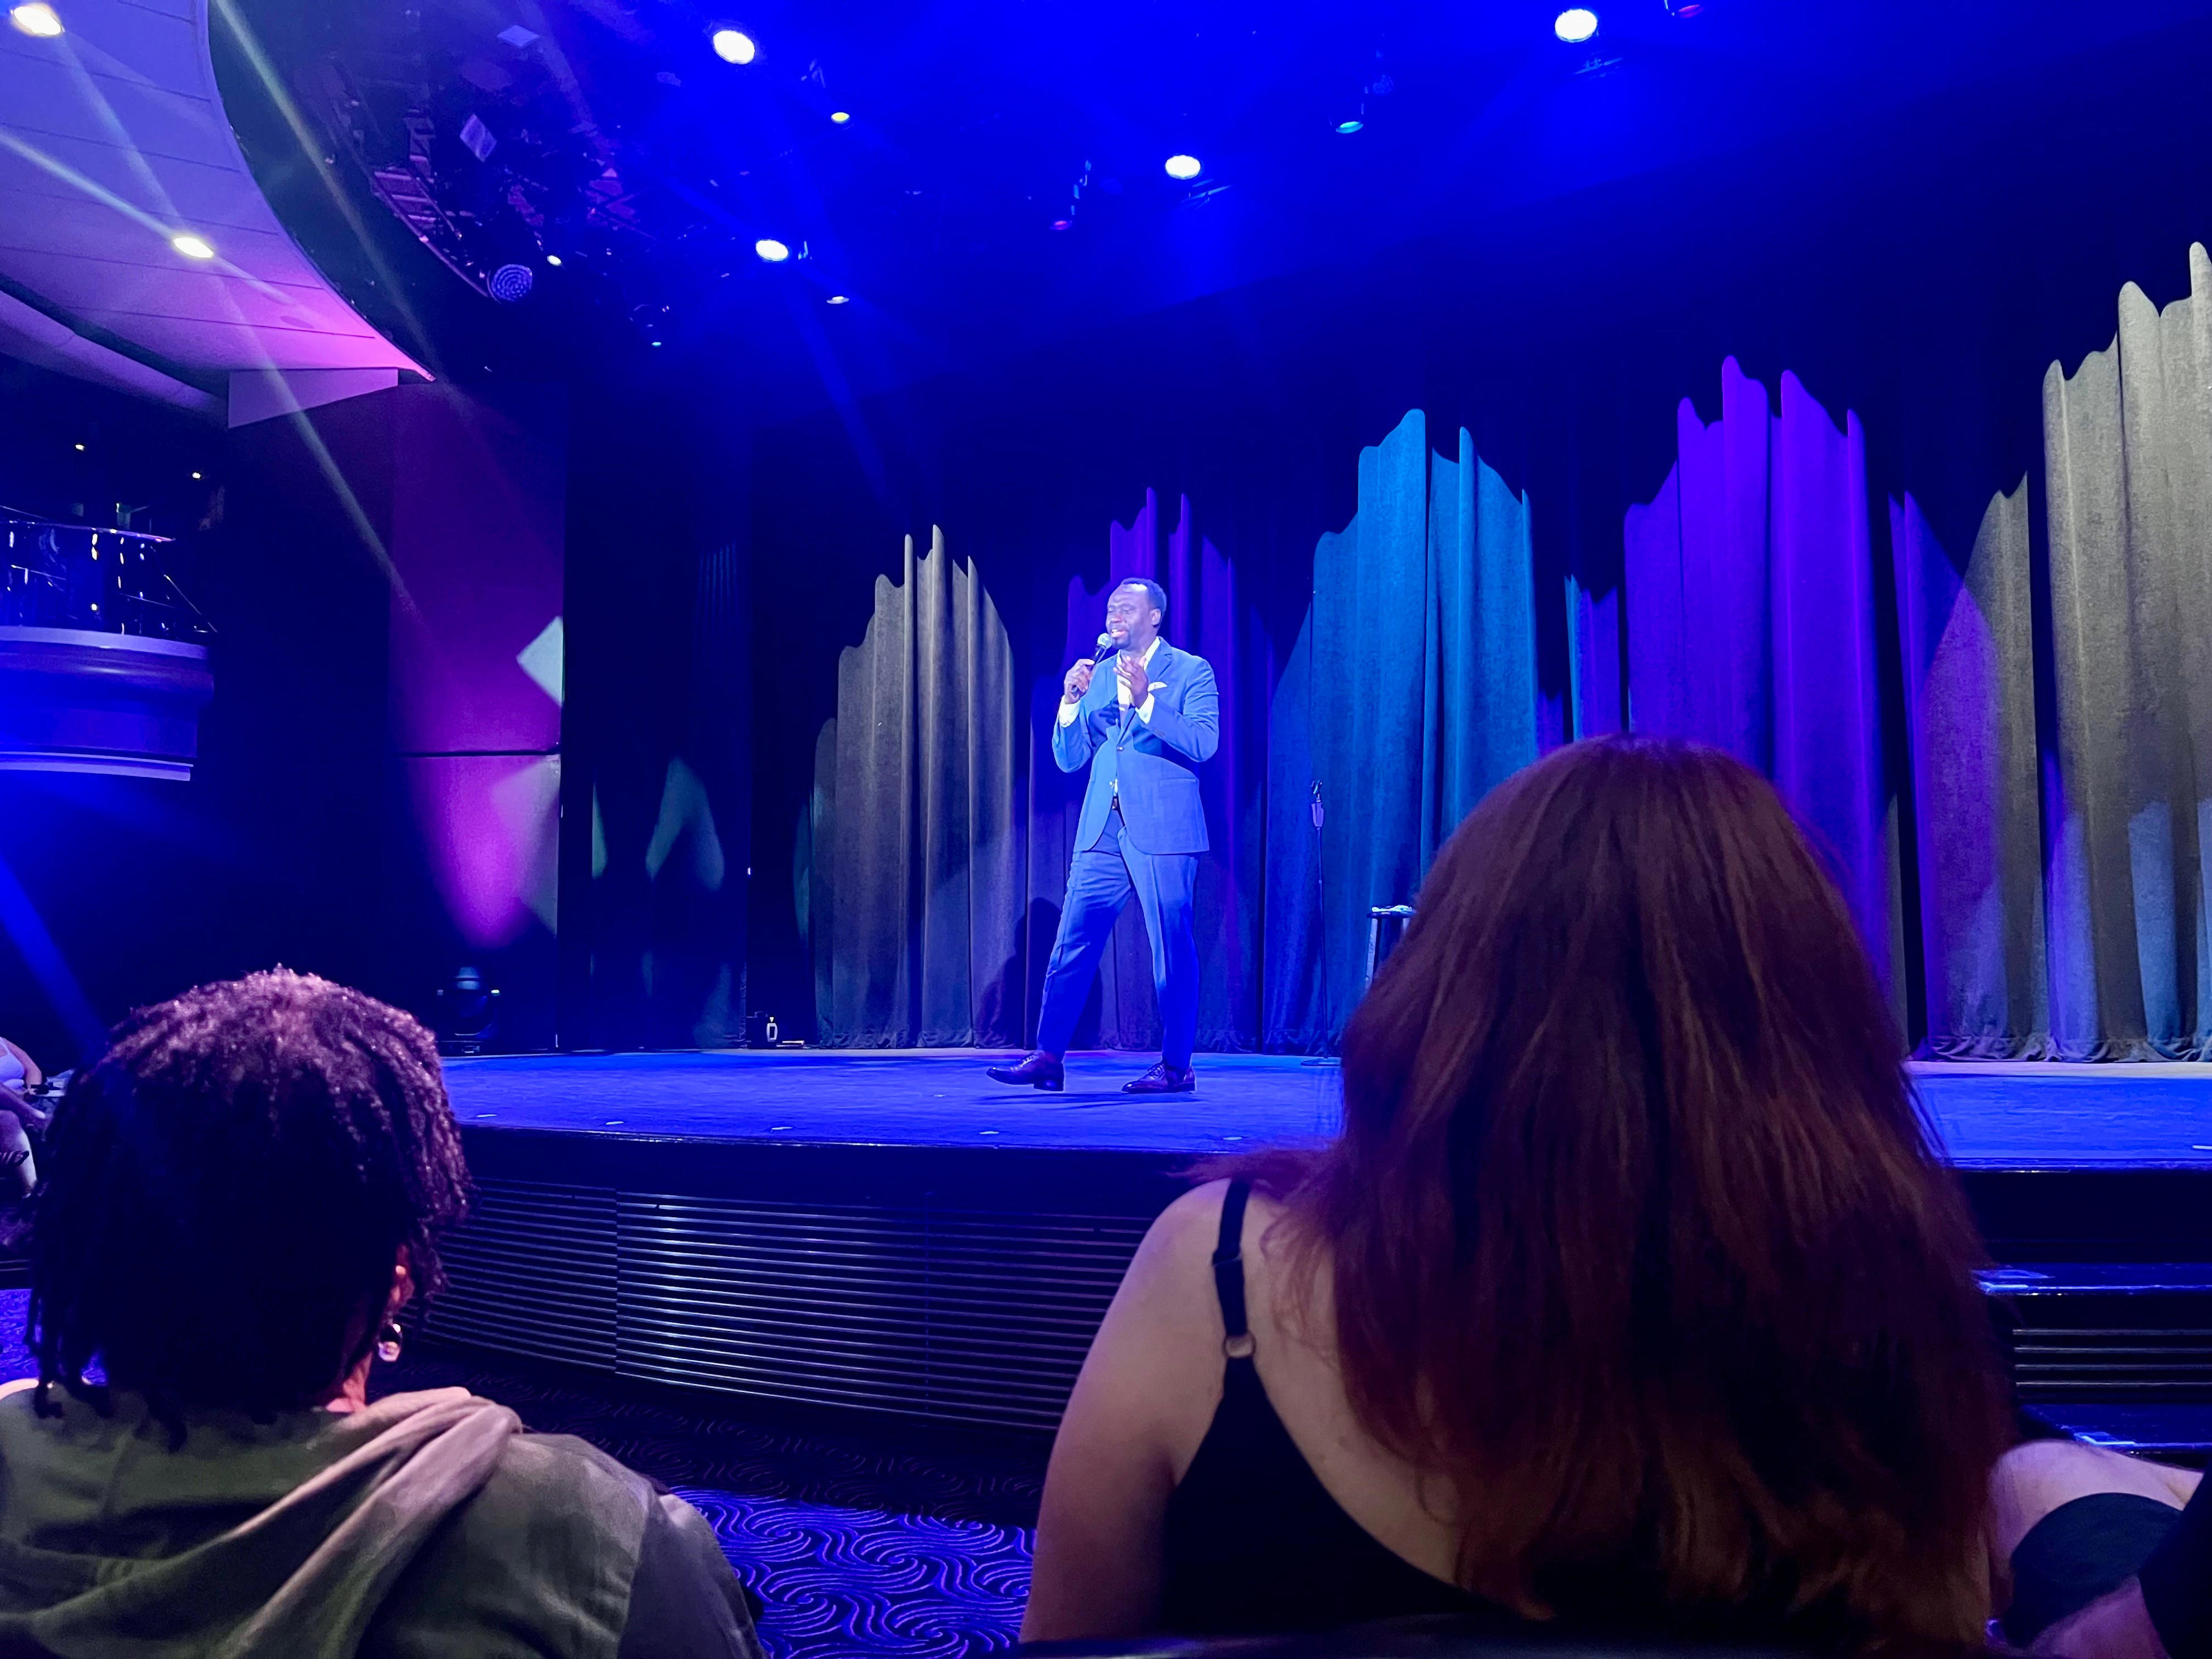 <p>The comedy headliner was named A-Train, and I saw his first act on Friday evening.</p><p>He was truly hilarious, and I was a little bummed I missed his adult comedy on Saturday night — but it was playing at 11 p.m., and that was just too late for me.</p>